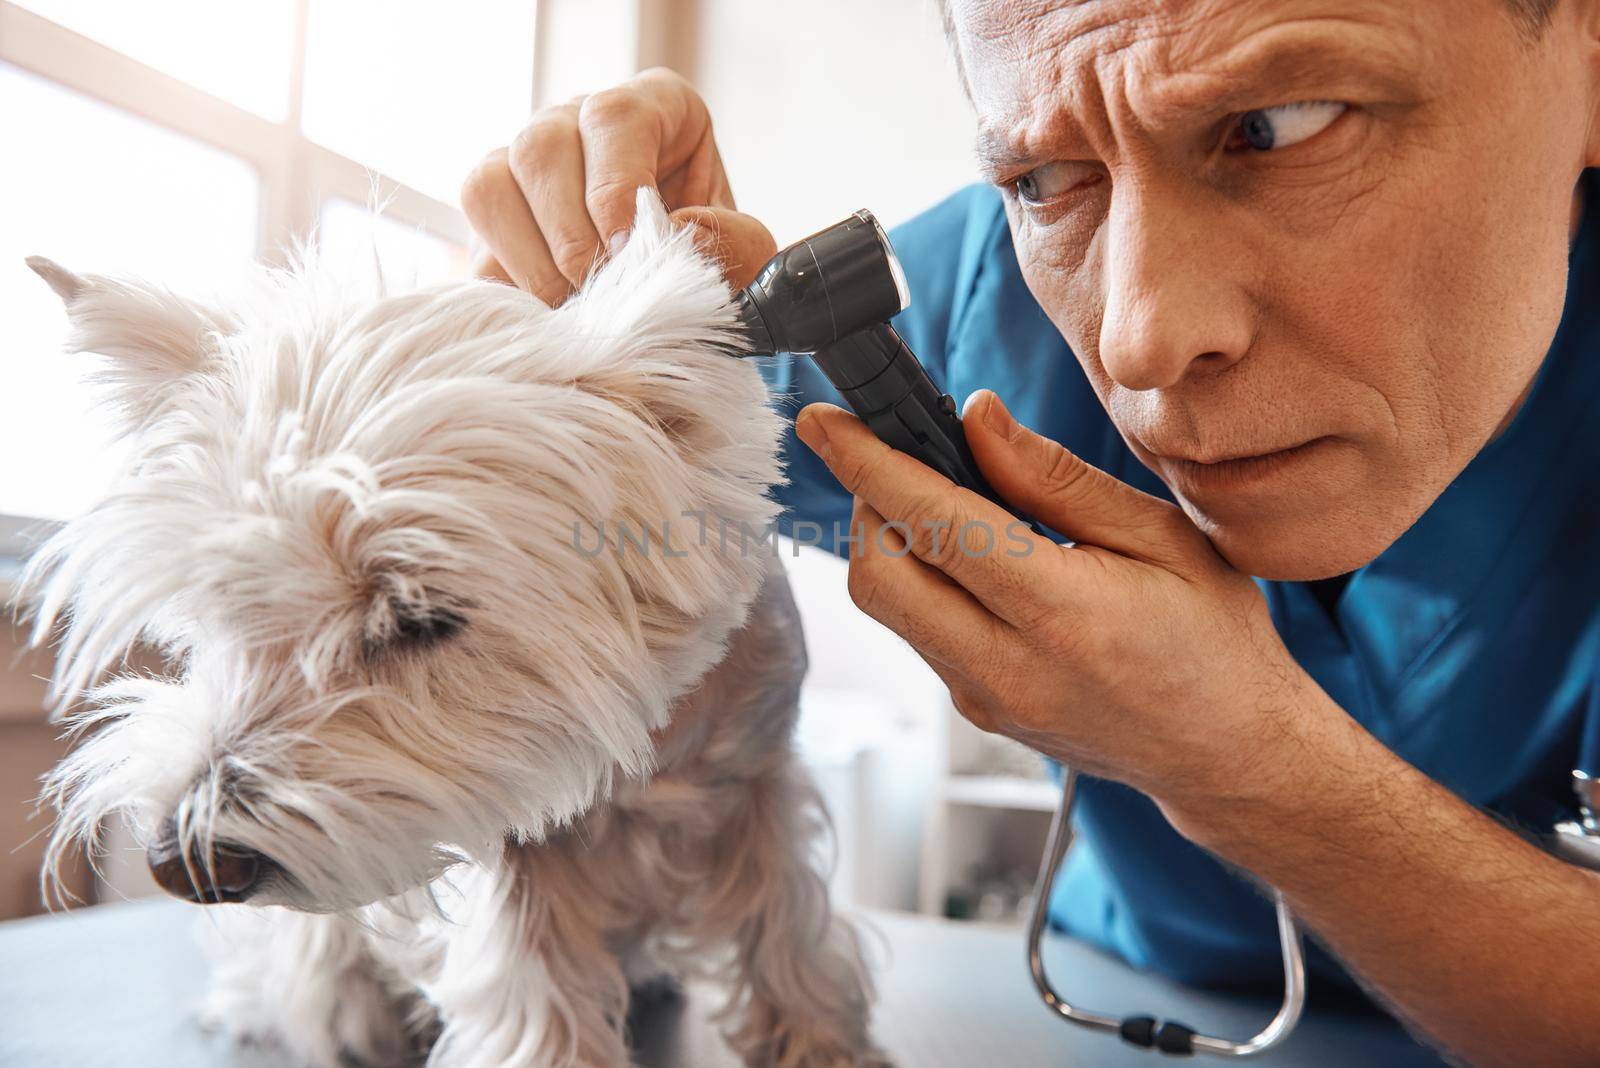 I have to be very attentive. Serious middle aged vet is checking dog's ear while working at veterinary clinic. Pet care concept. Medicine concept. Animal hospital